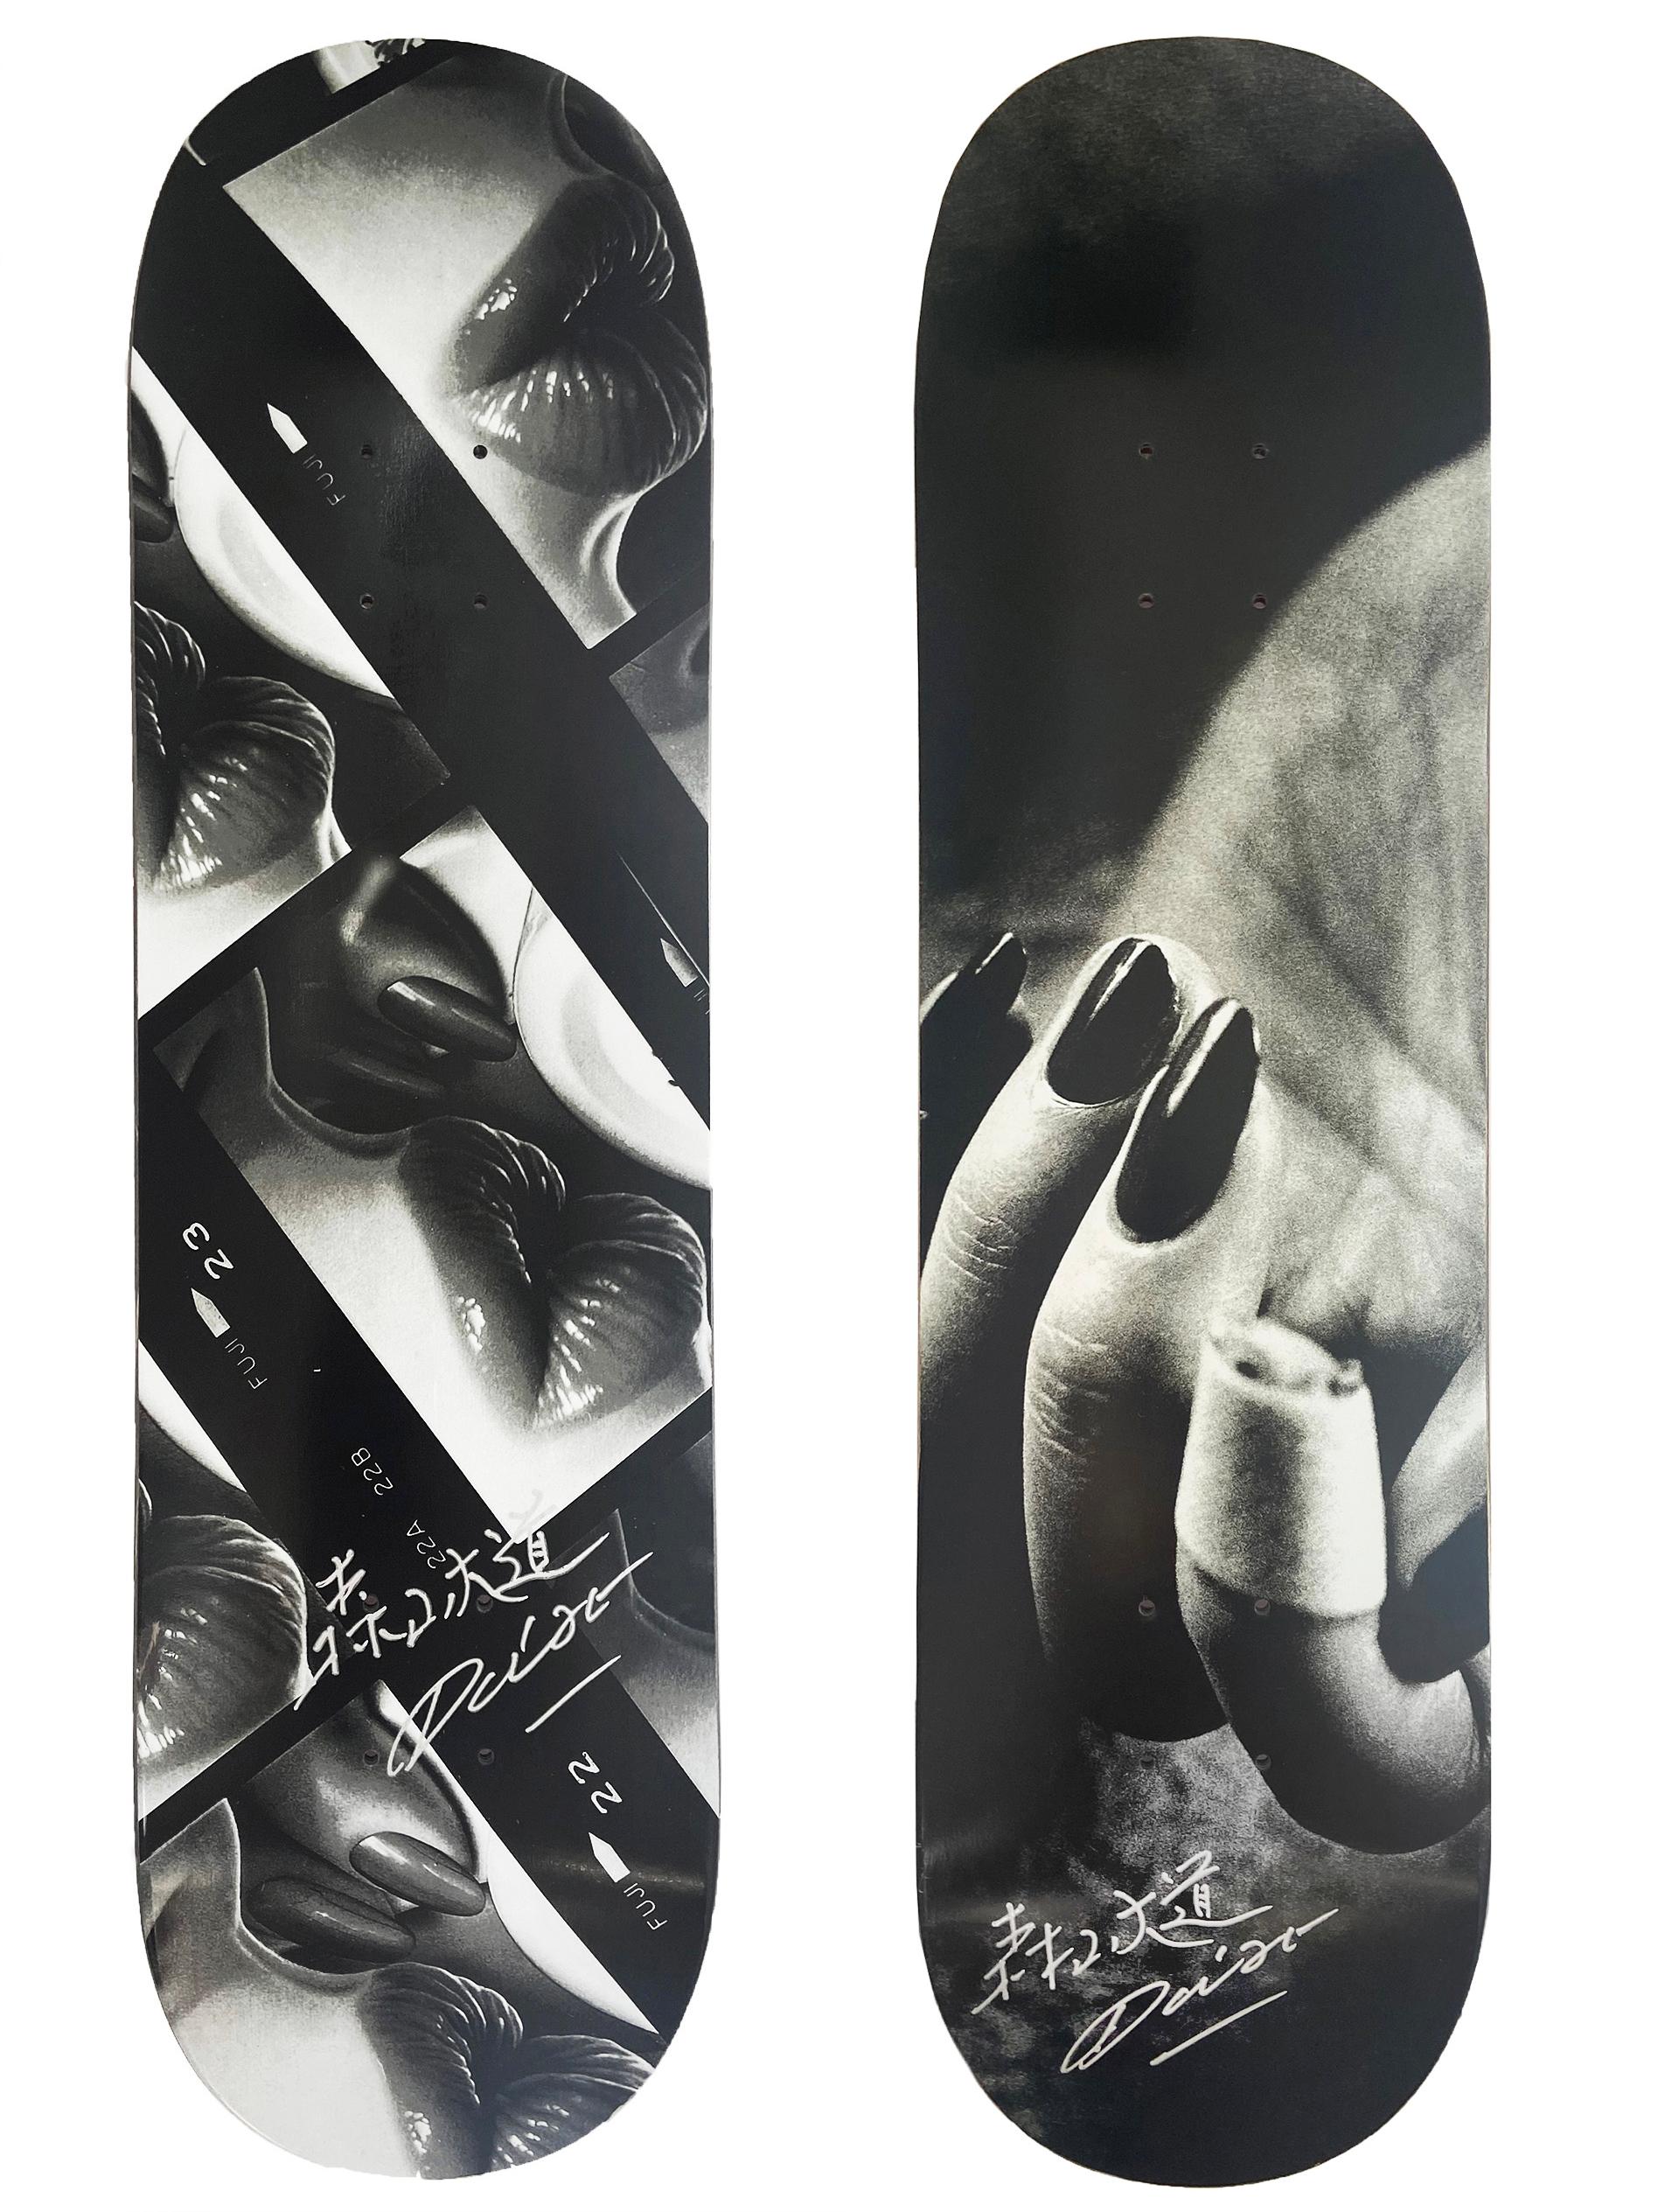 Hand-signed Daido Moriyama Skateboard decks: set of 2 individual works:
These works originated as a result of the collaboration between the legendary Japanese street photographer Daido Moriyama & Evisen Skateboards. The decks feature Moriyama's